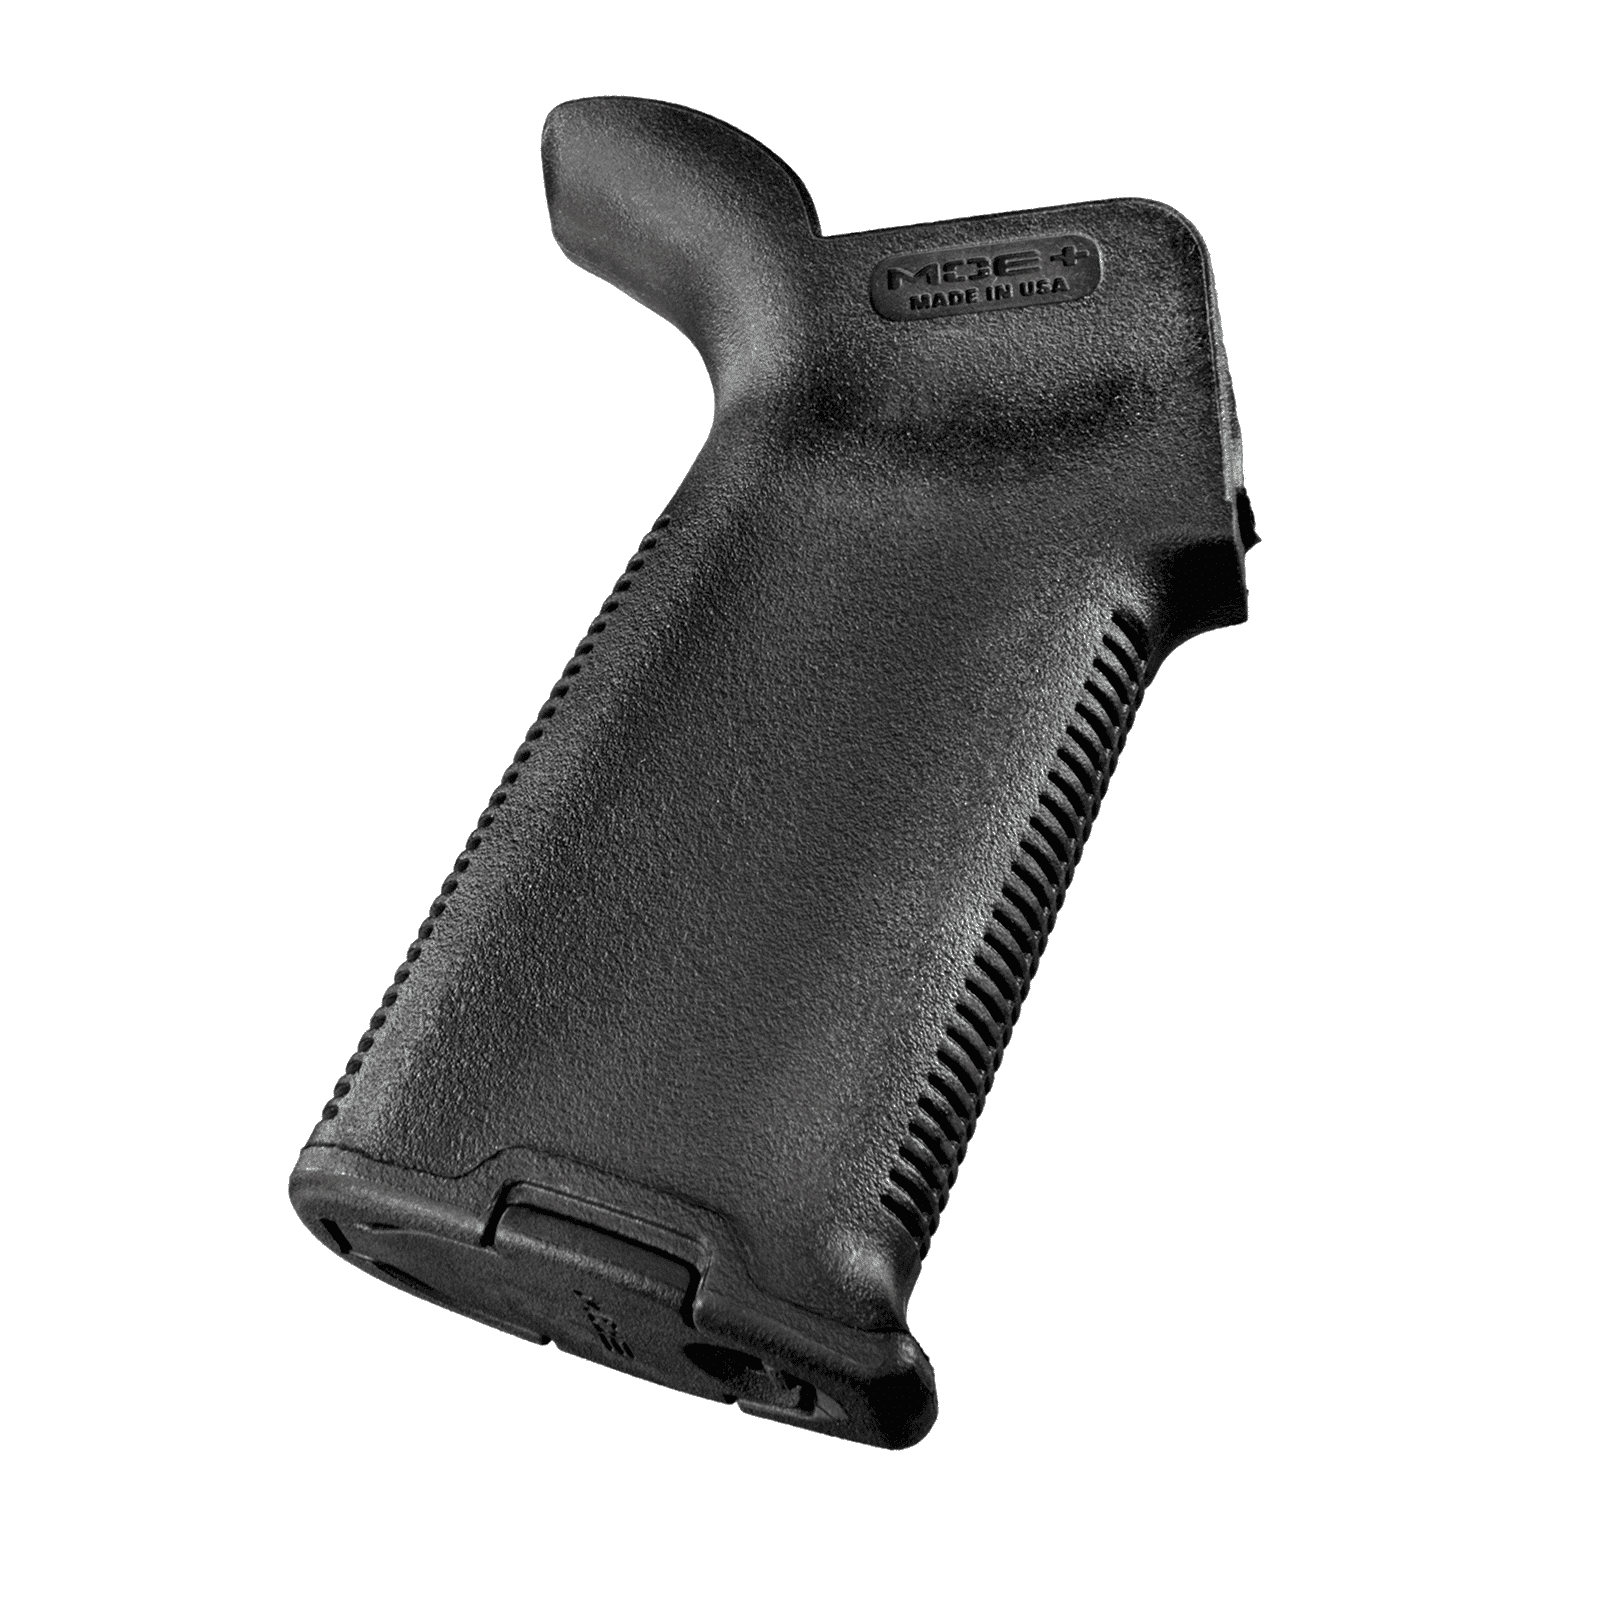 Magpul MOE+ Grip w/ Storage Compartment – Pistol Grip for AR-15 